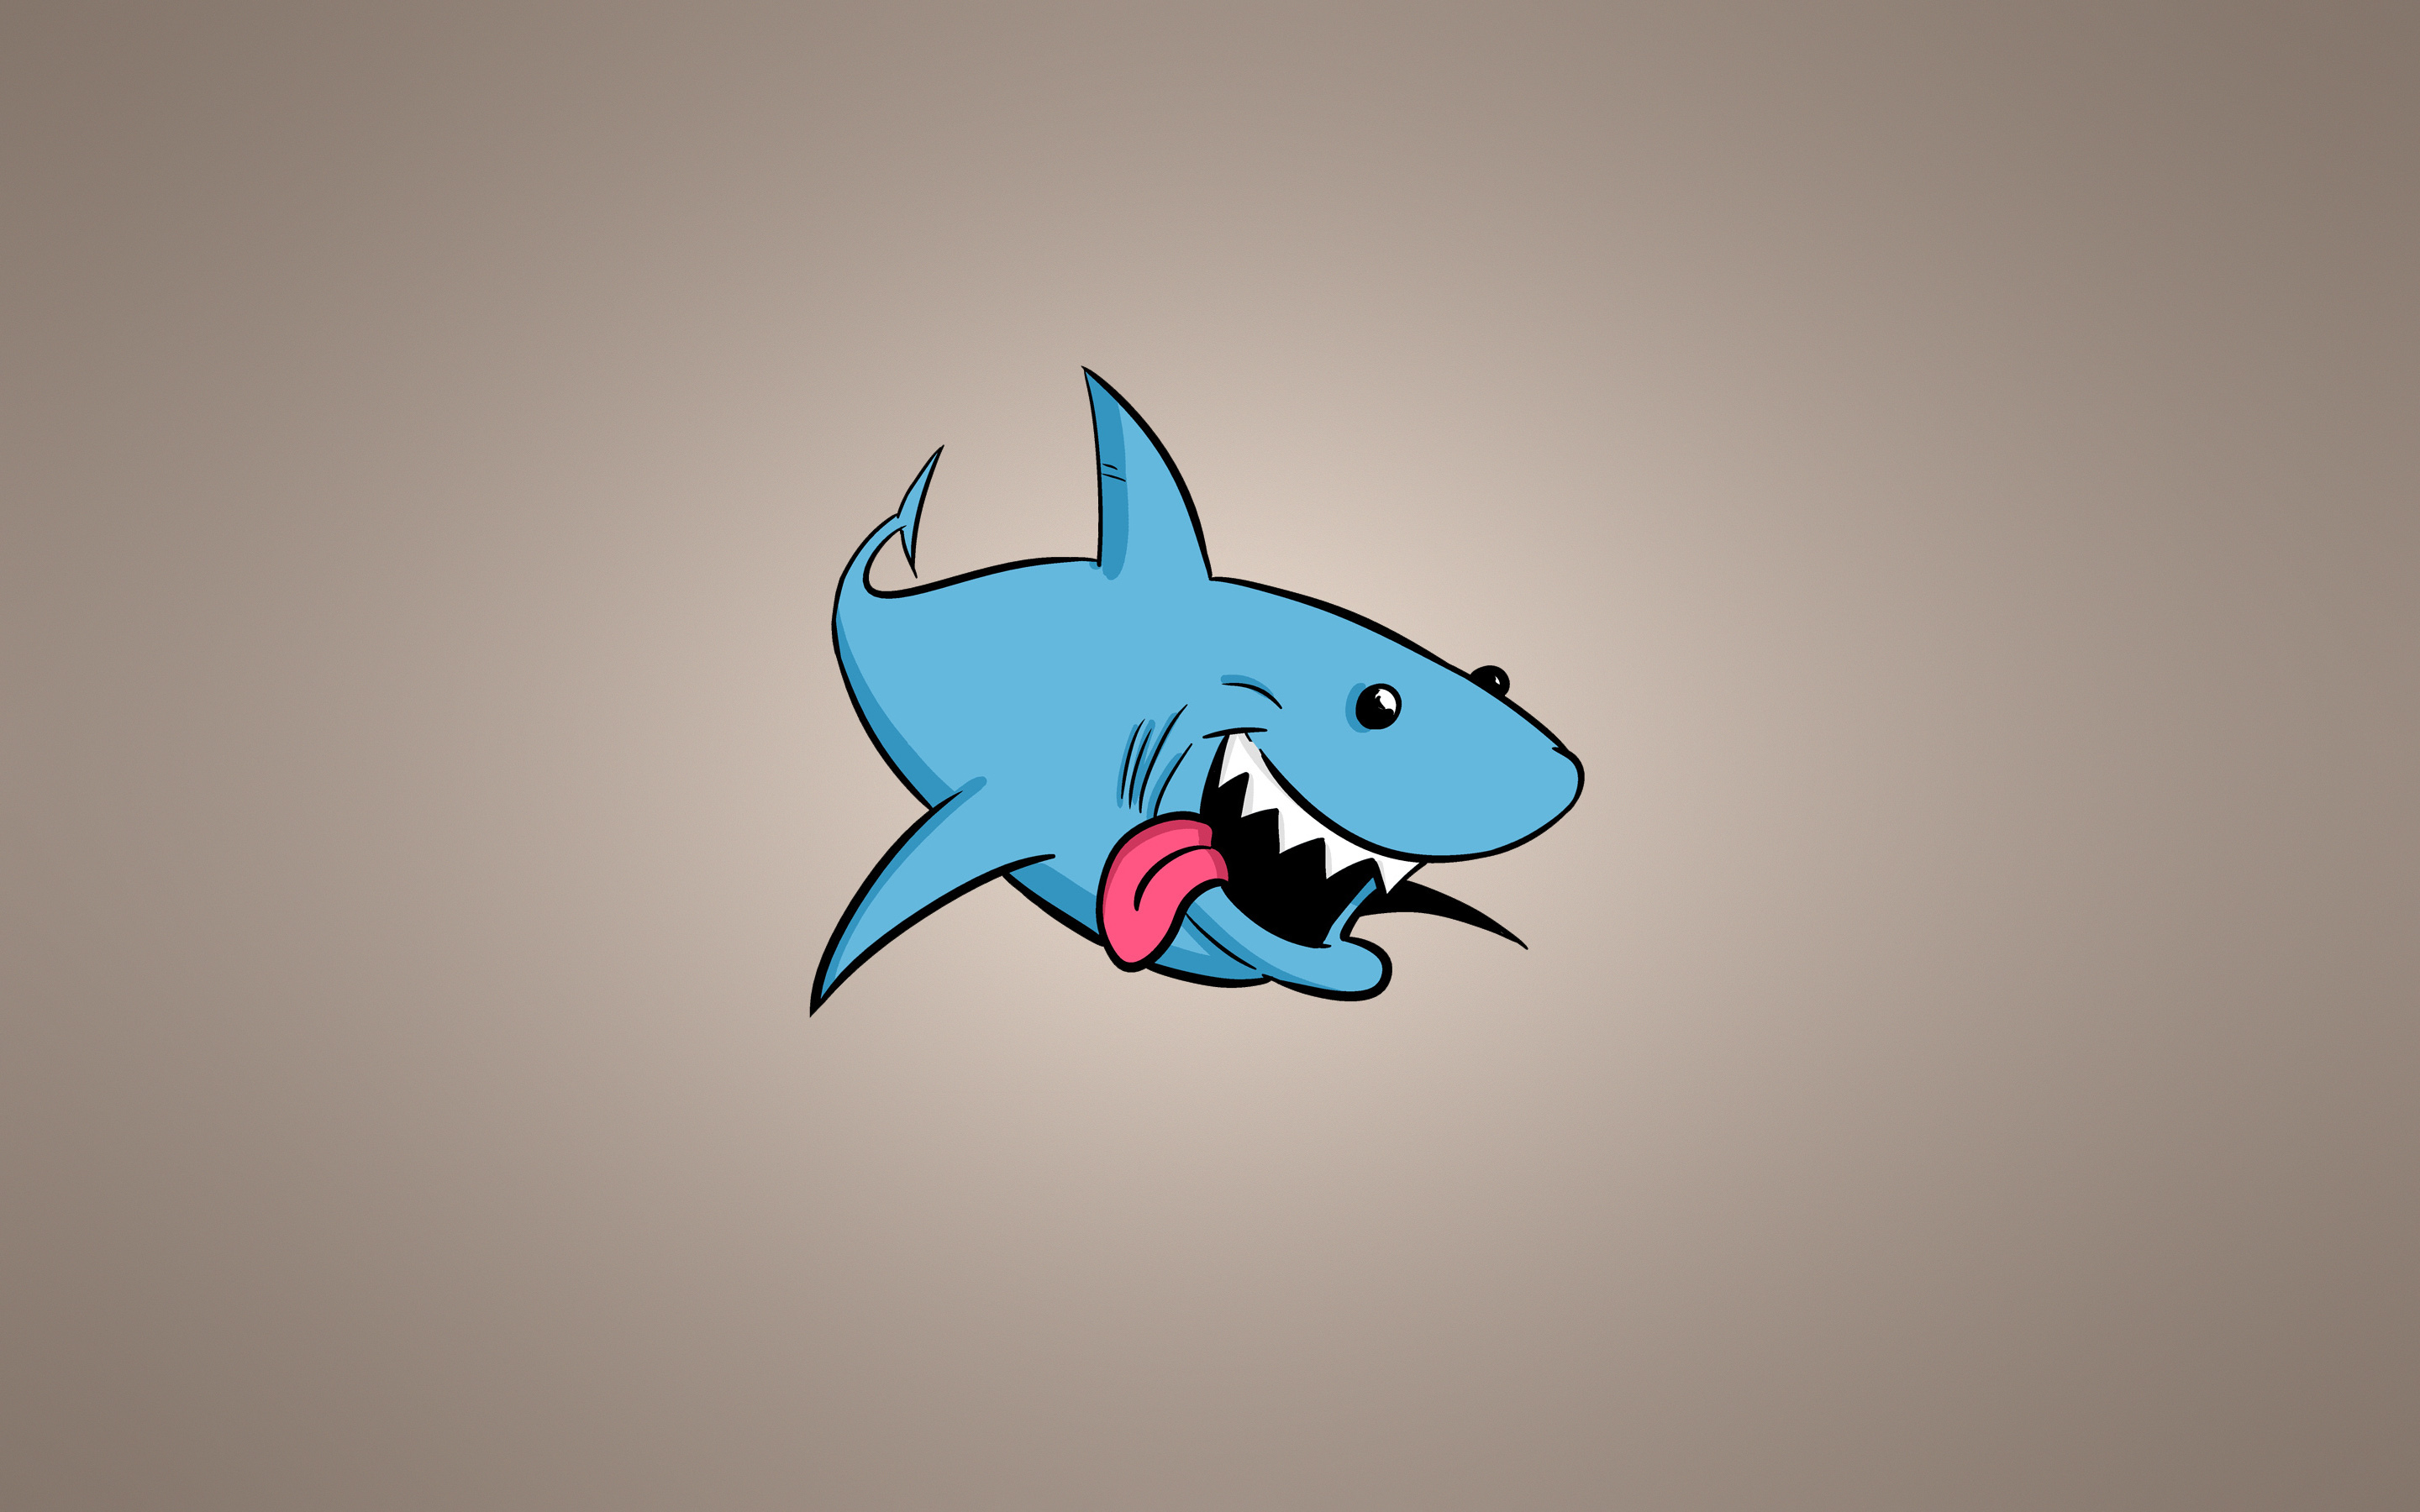 art, shark, vector, background, protruding tongue, tongue stuck out